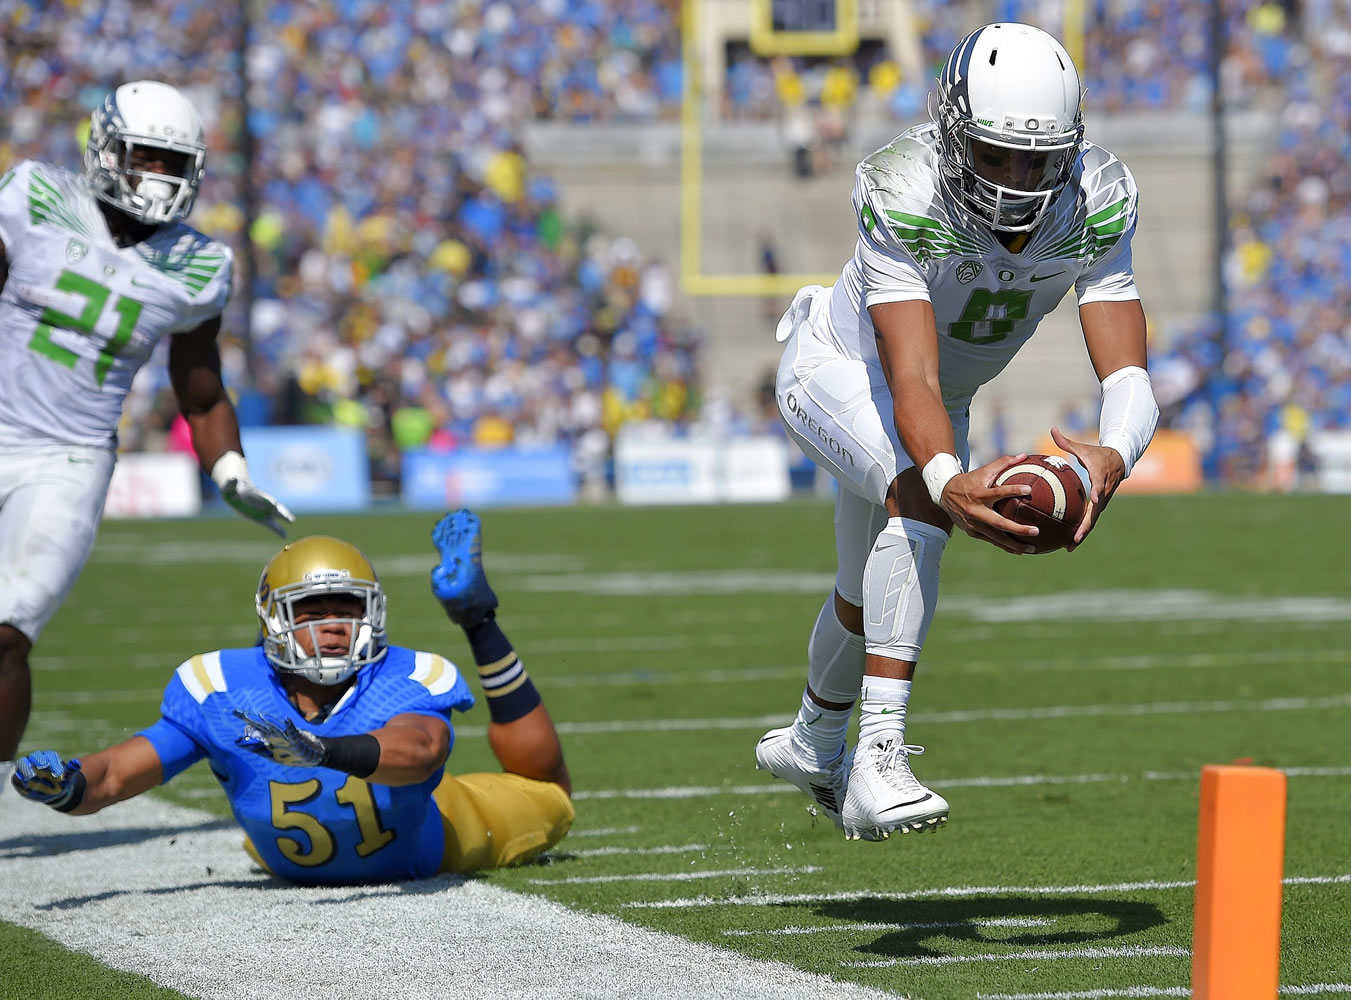 Oregon quarterback Marcus Mariota, right, dives in for a touchdown as UCLA linebacker Aaron Wallace, center, misses the tackle during the first quarter Saturday, Oct. 11, 2014, in Pasadena, Calif. (AP Photo/Mark J.